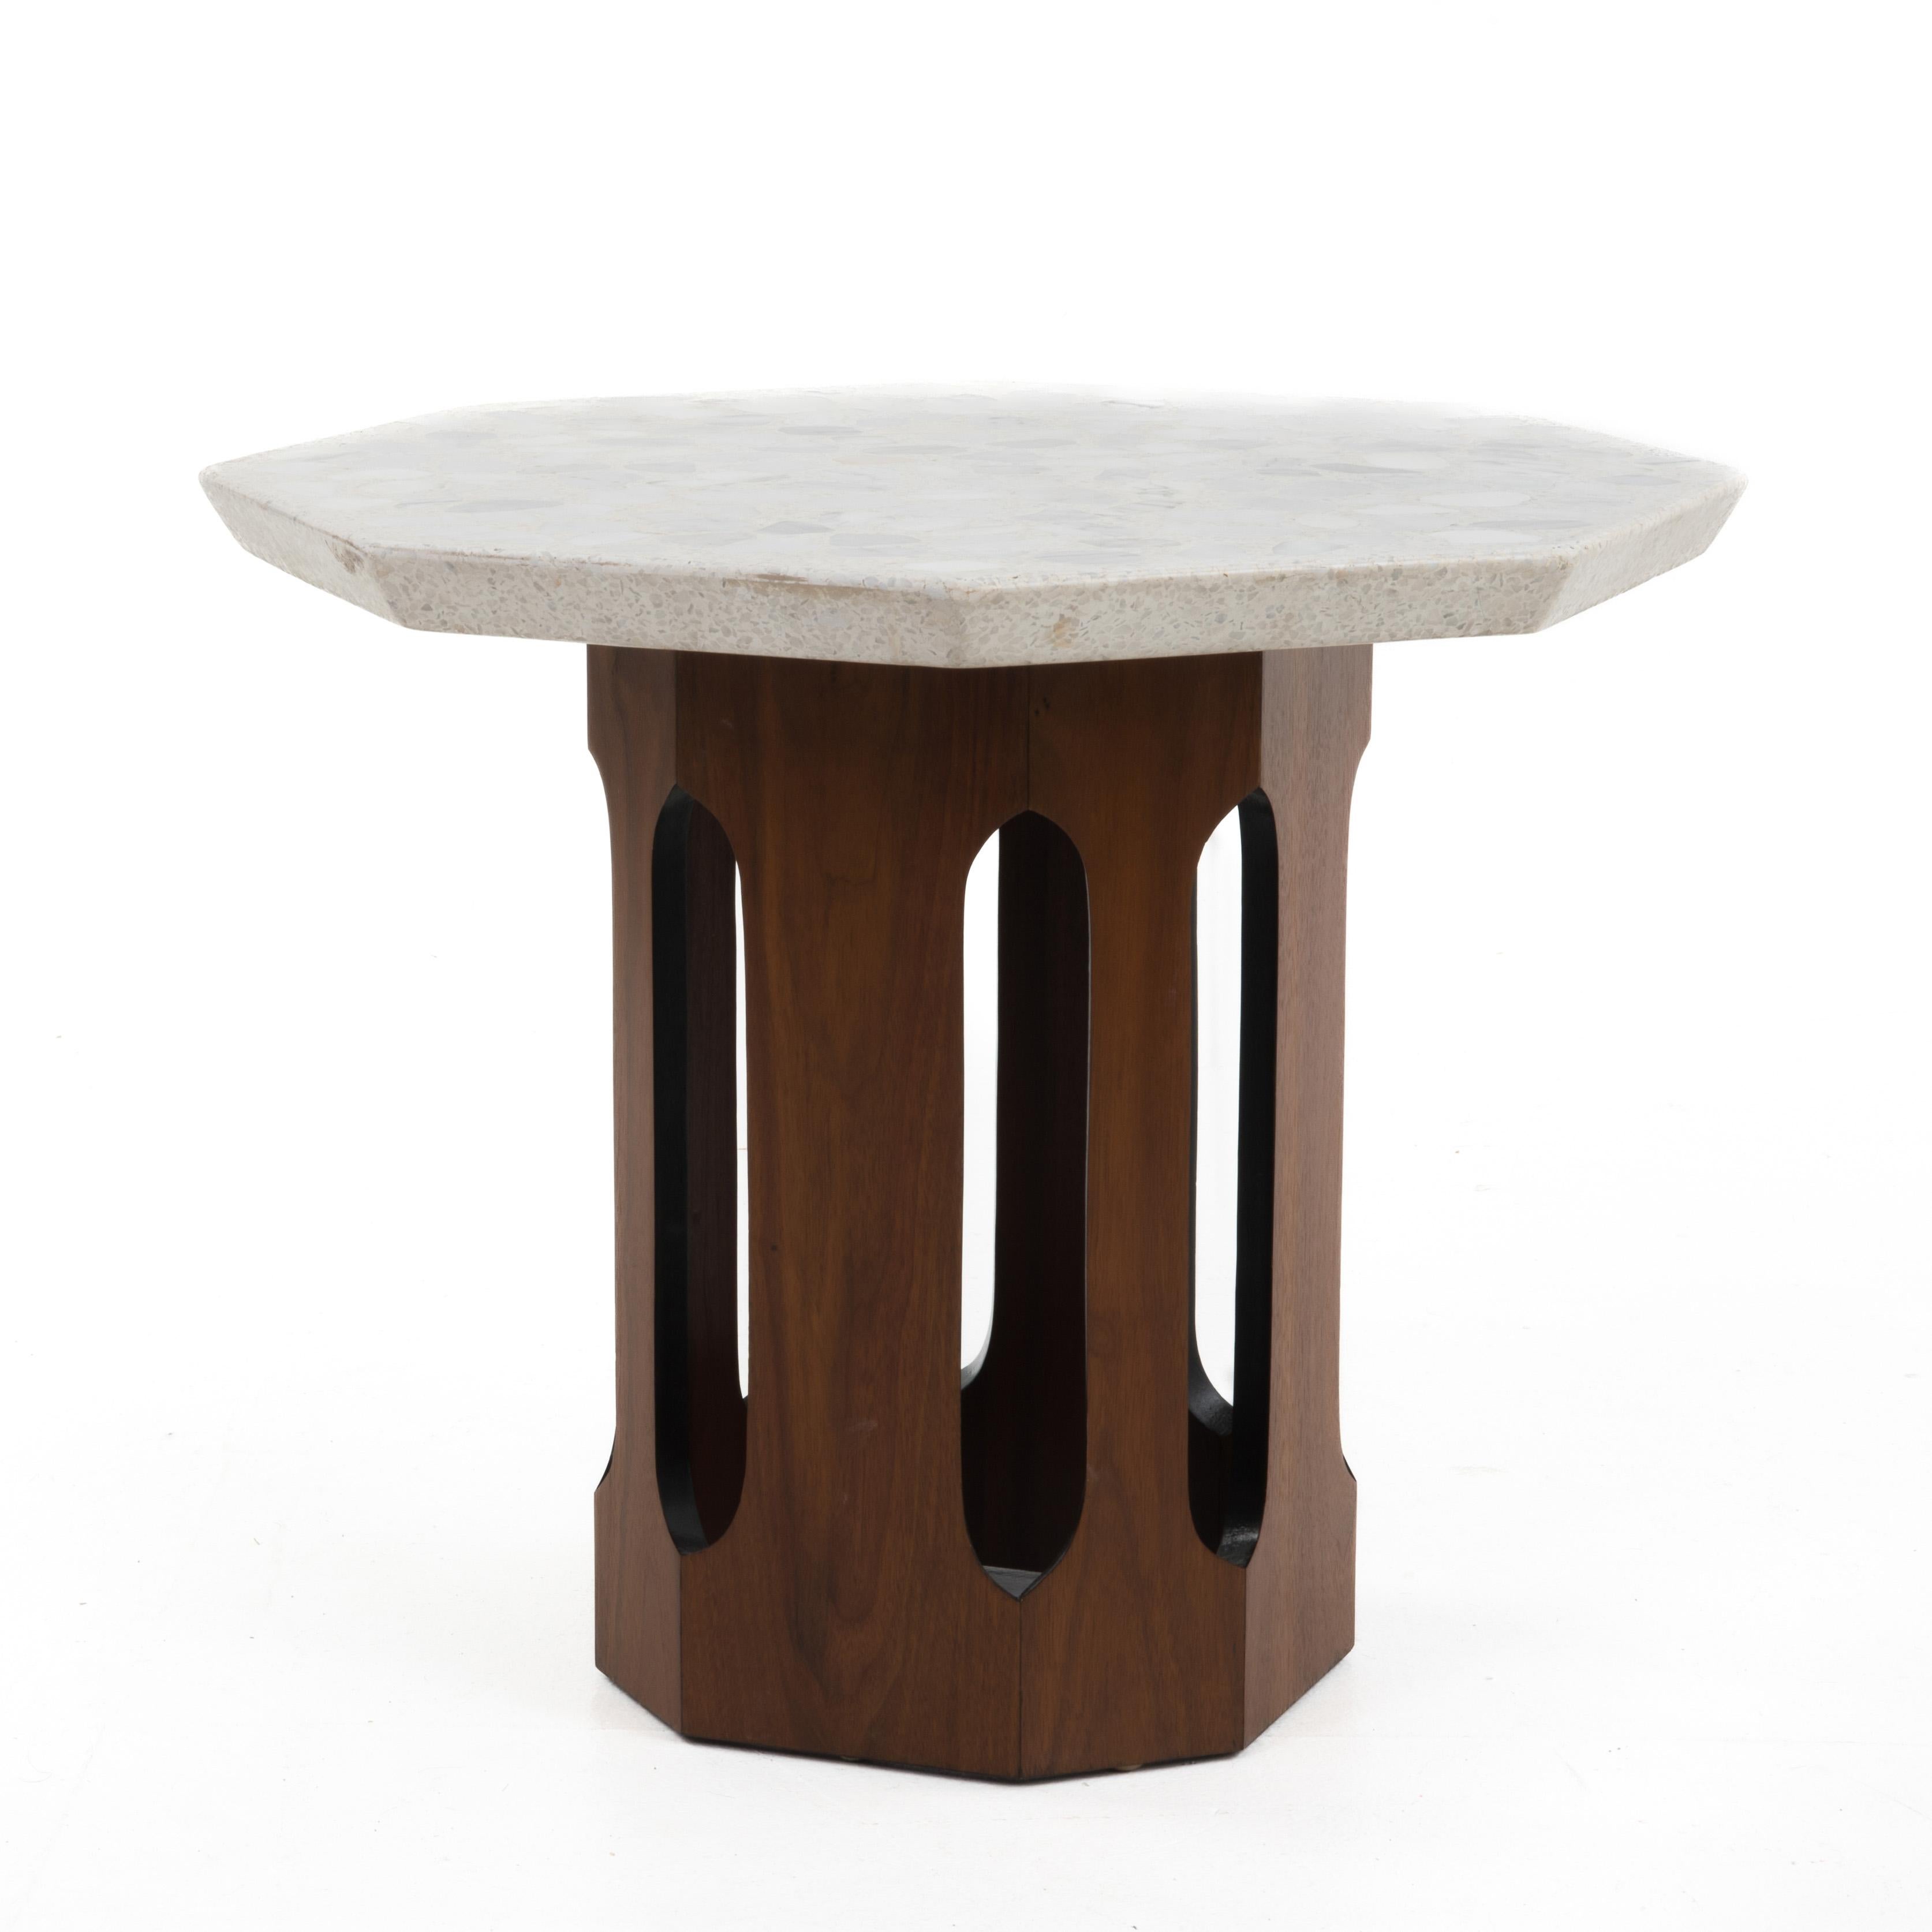 Harvey Probber Terrazzo Travertine Stone Walnut Side Tables Octagon - A Pair For Sale 2